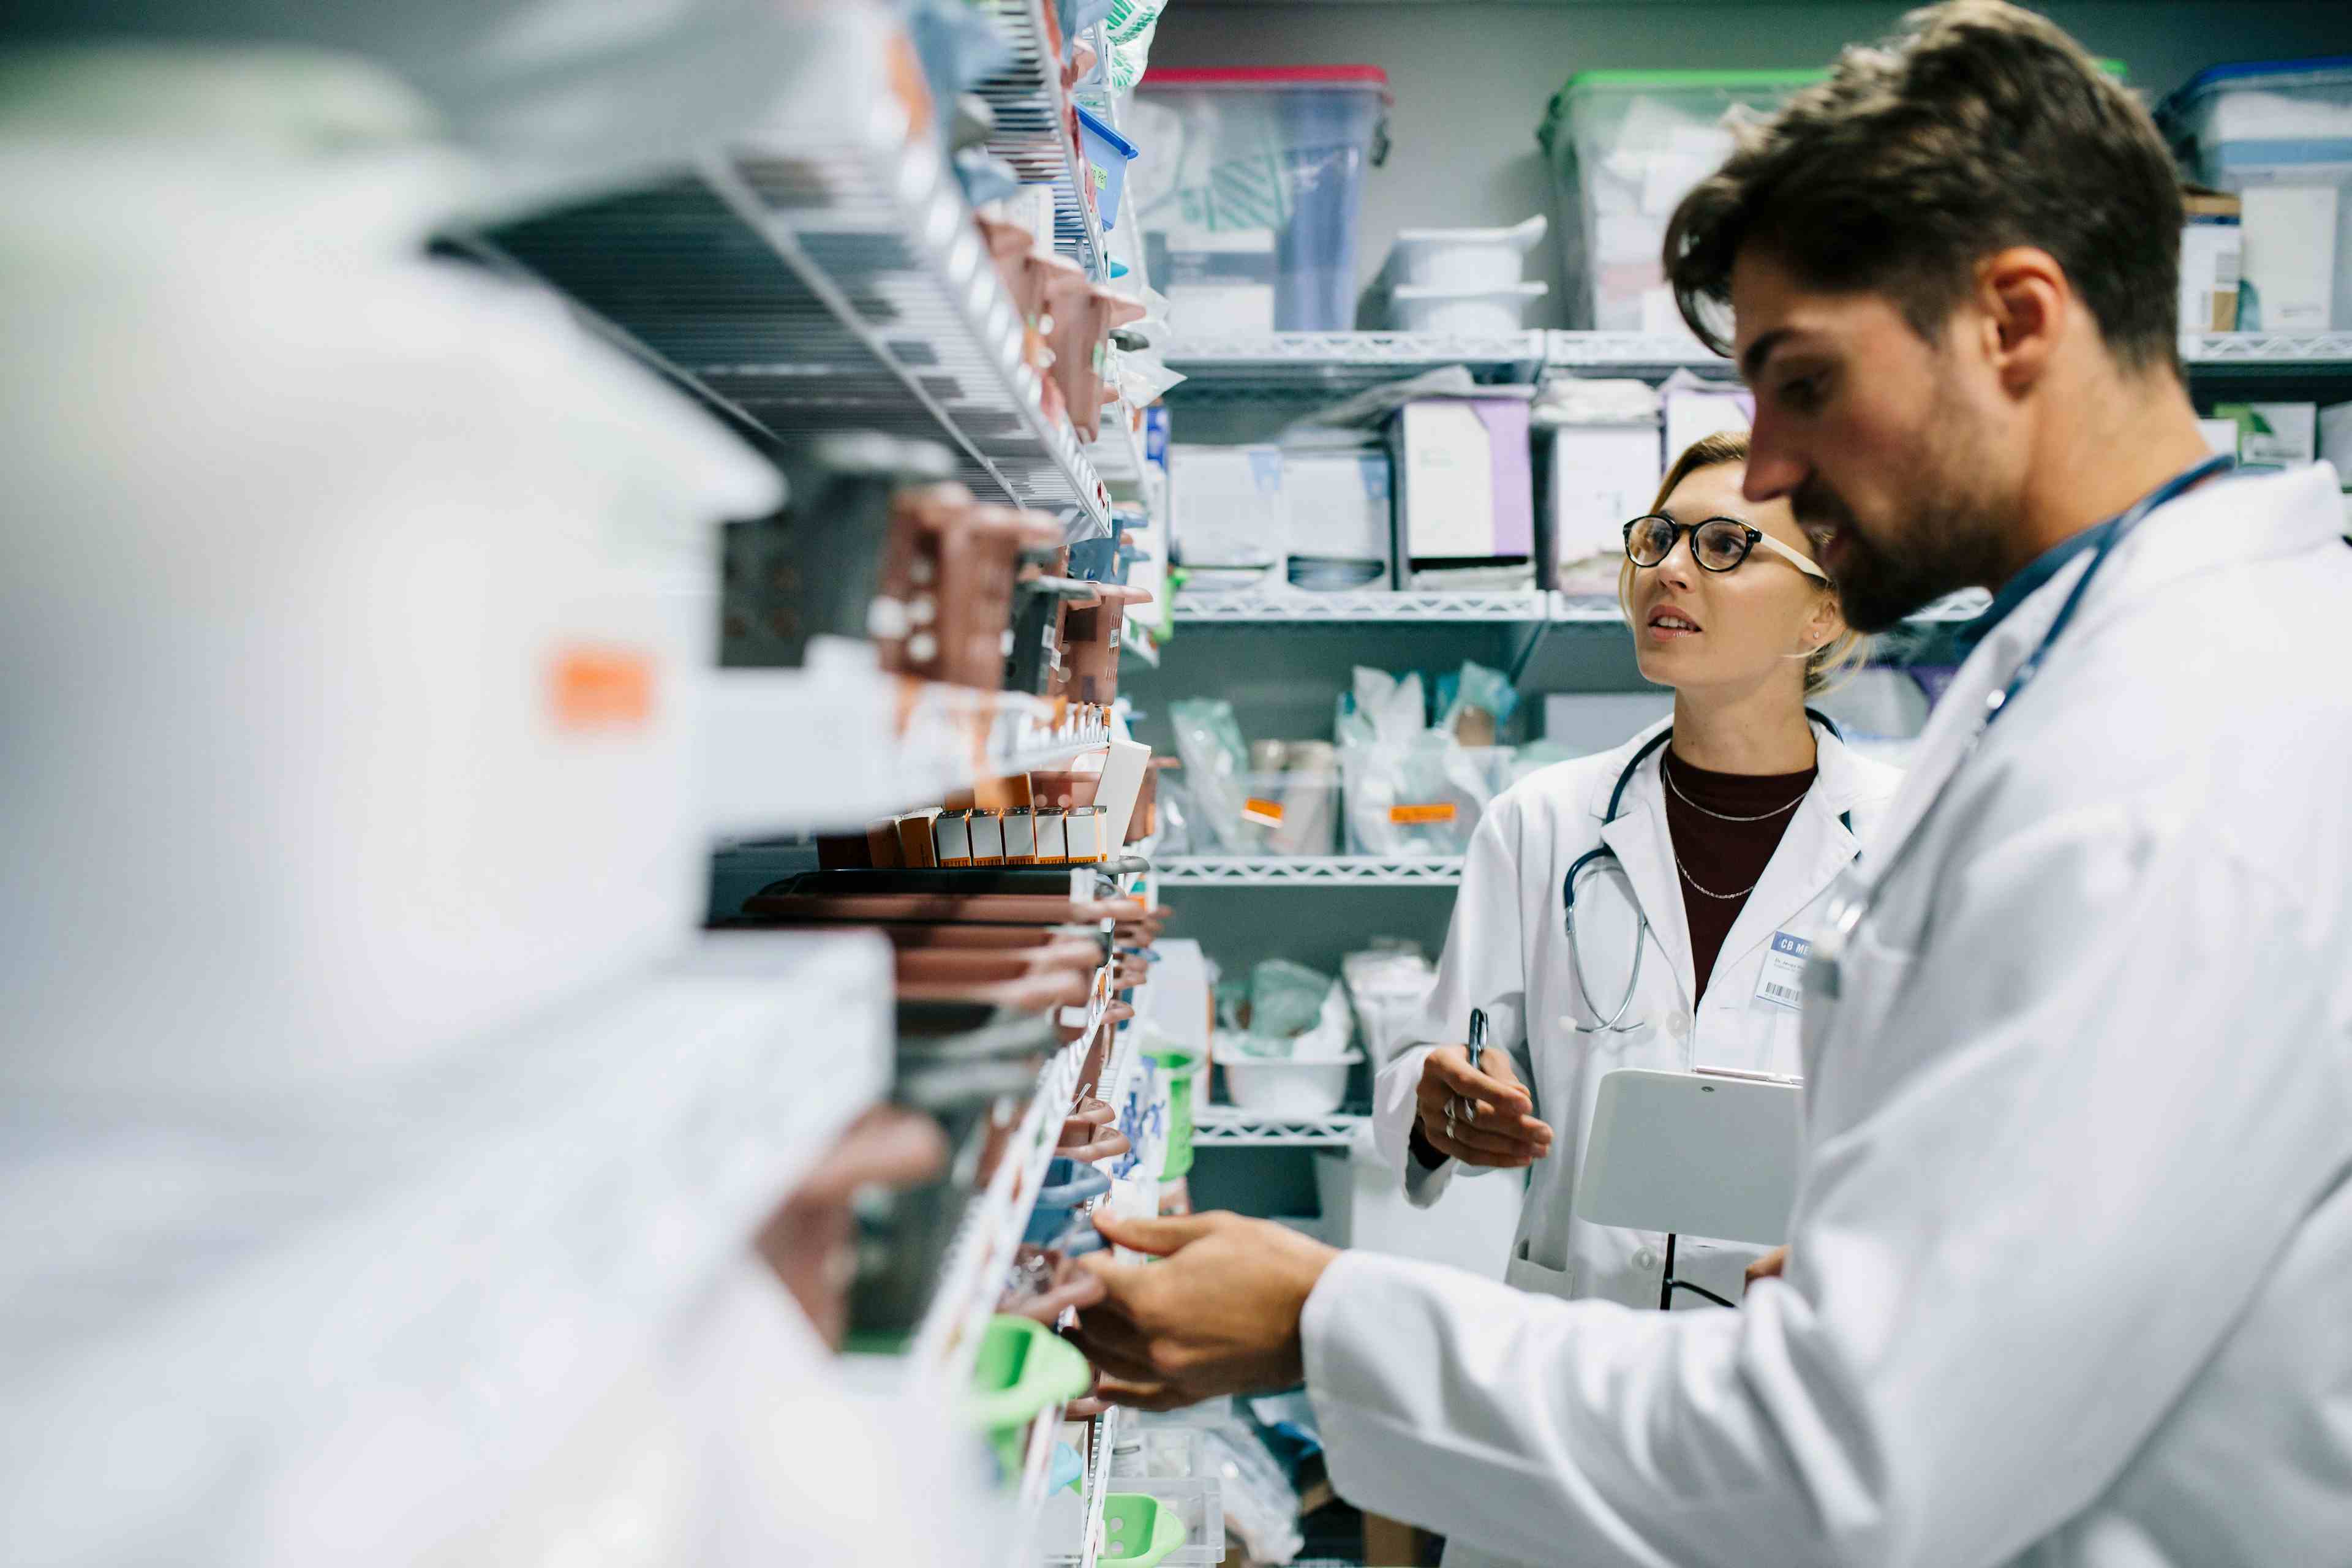 Pharmacists checking inventory at hospital pharmacy- Image credit: Jacob Lund | stock.adobe.com 